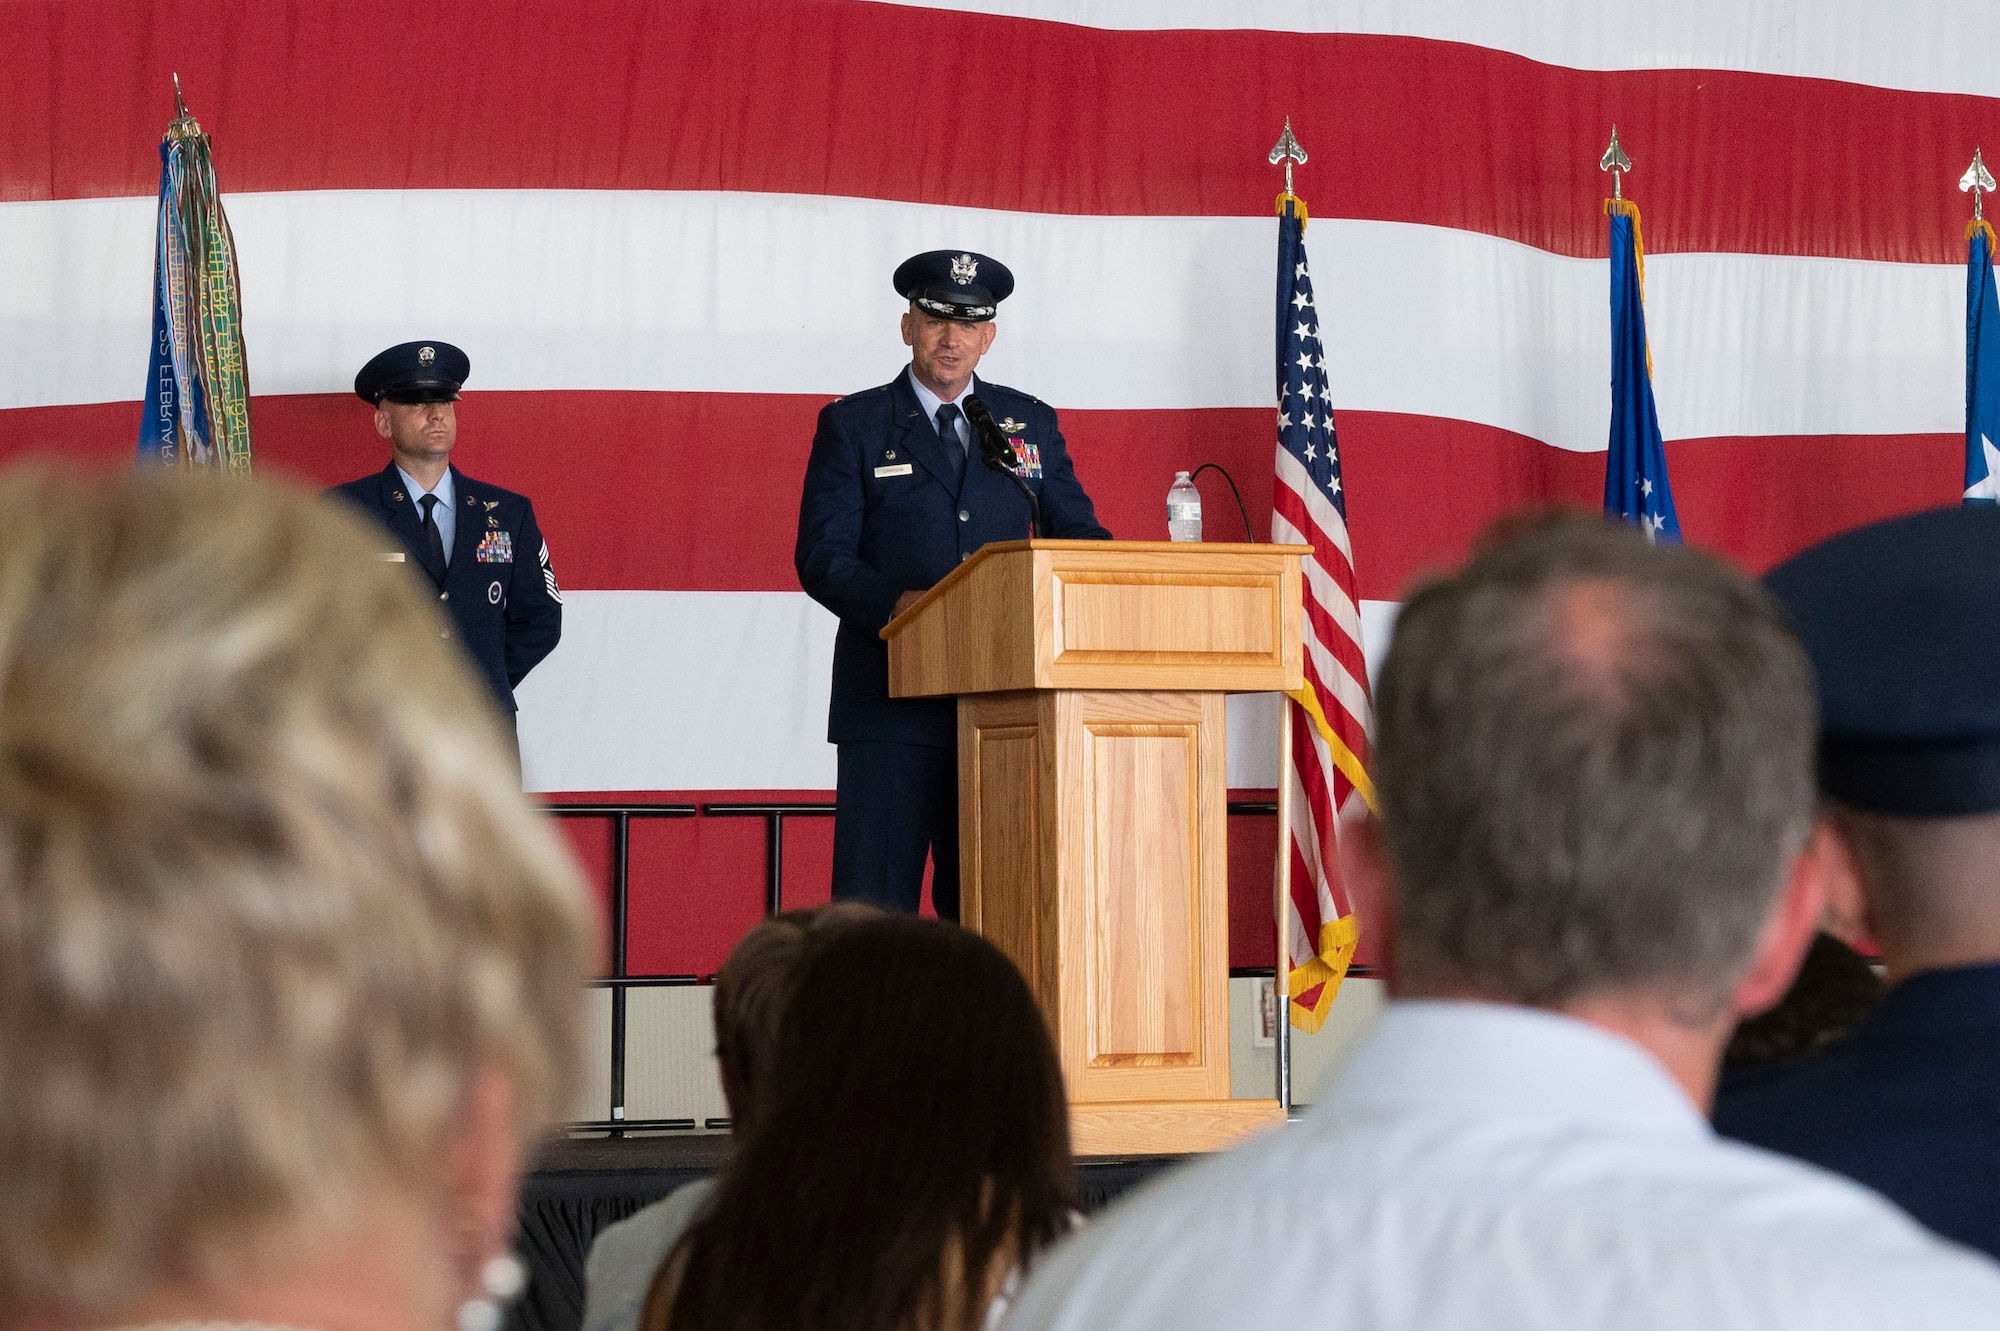 U.S. Air Force Col. Kevin Davidson, 47th Flying Training Wing commander, gives a speech during the 47th Flying Training Wing change of command ceremony at Laughlin Air Force Base, Texas, July 22, 2022. As commander, Davidson will oversee nearly 2,800 military and civilian personnel engaged in executing more than 61,000 aircraft sorties yearly in support of Laughlin's Specialized Undergraduate Pilot Training mission. (U.S. Air Force photo by Airman 1st Class Kailee Reynolds)